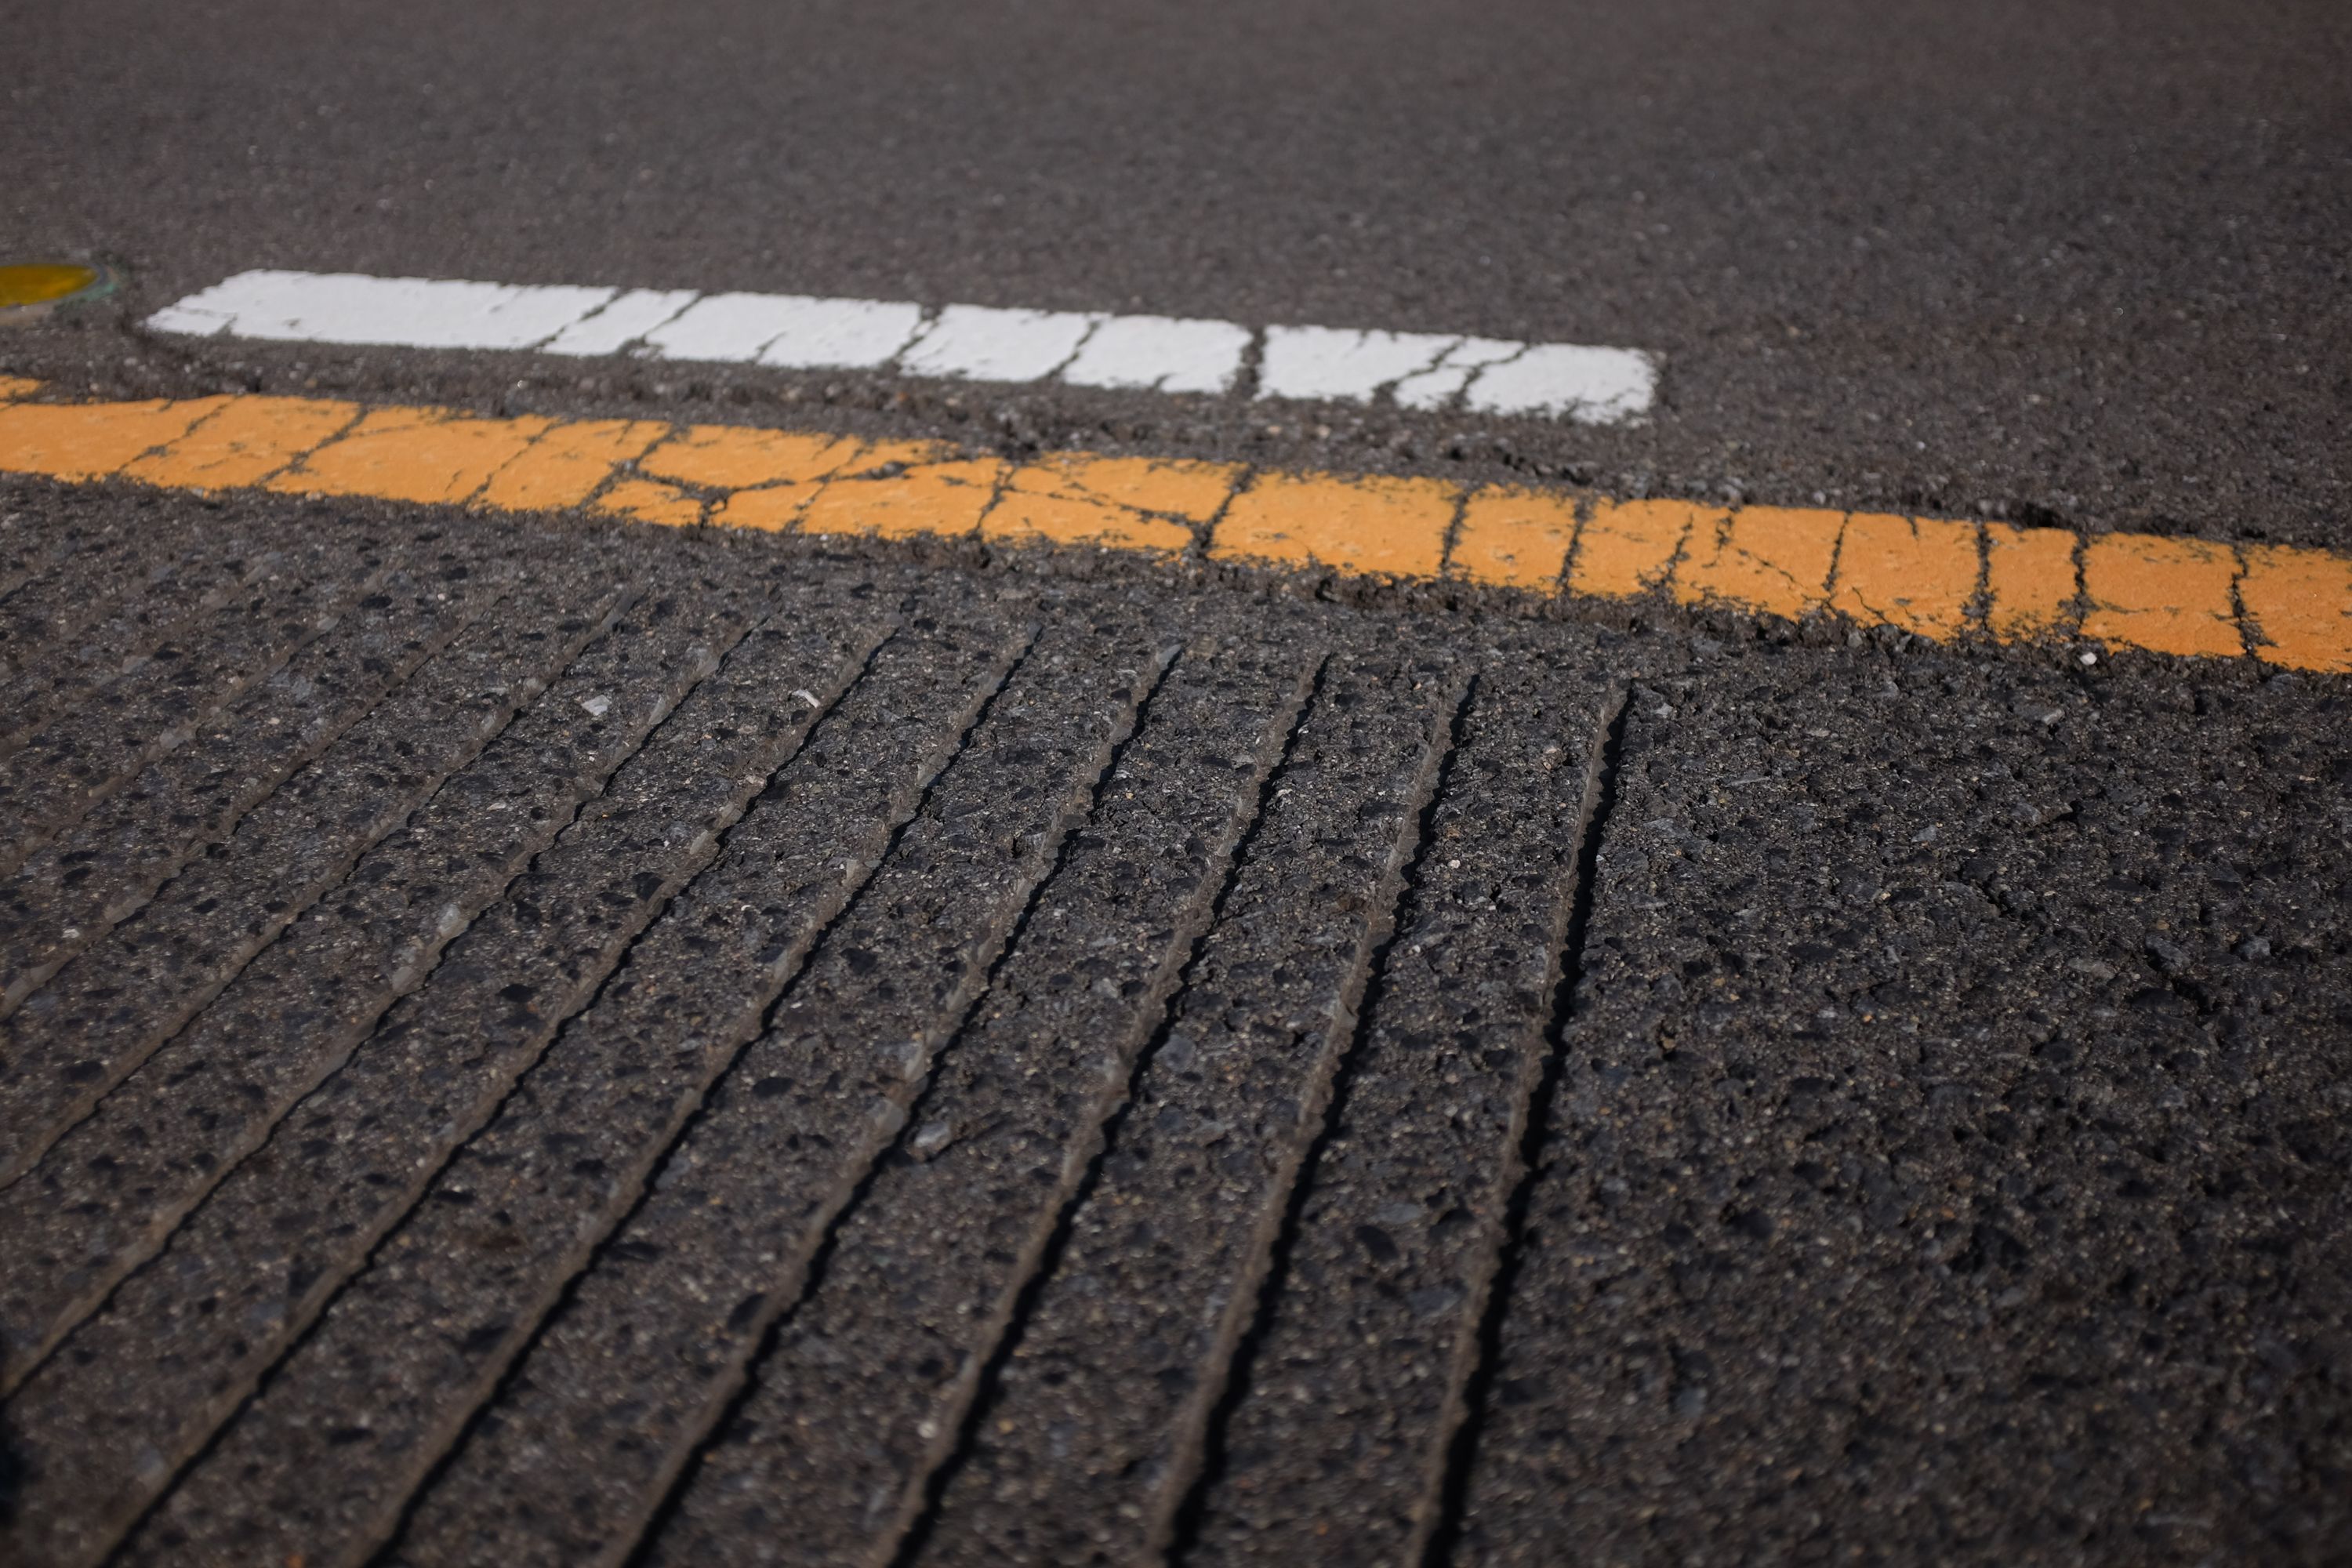 Grooves in the surface of the road which make a tune when driven over.